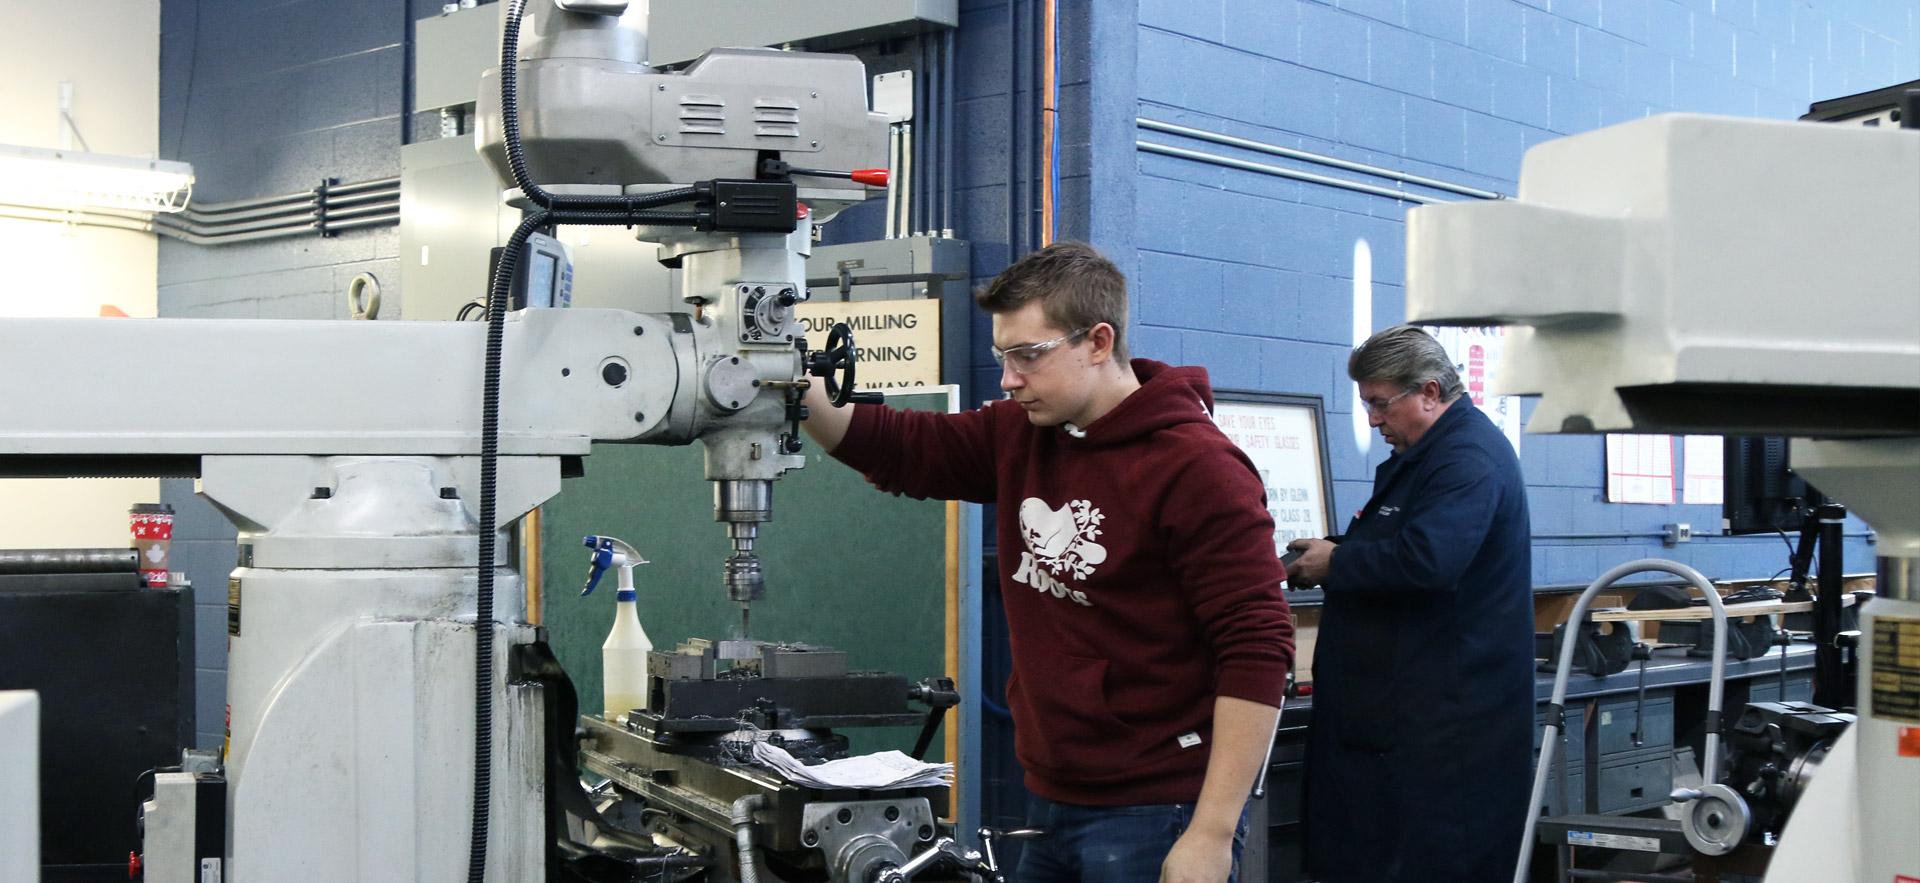 Male student working on a drill press.